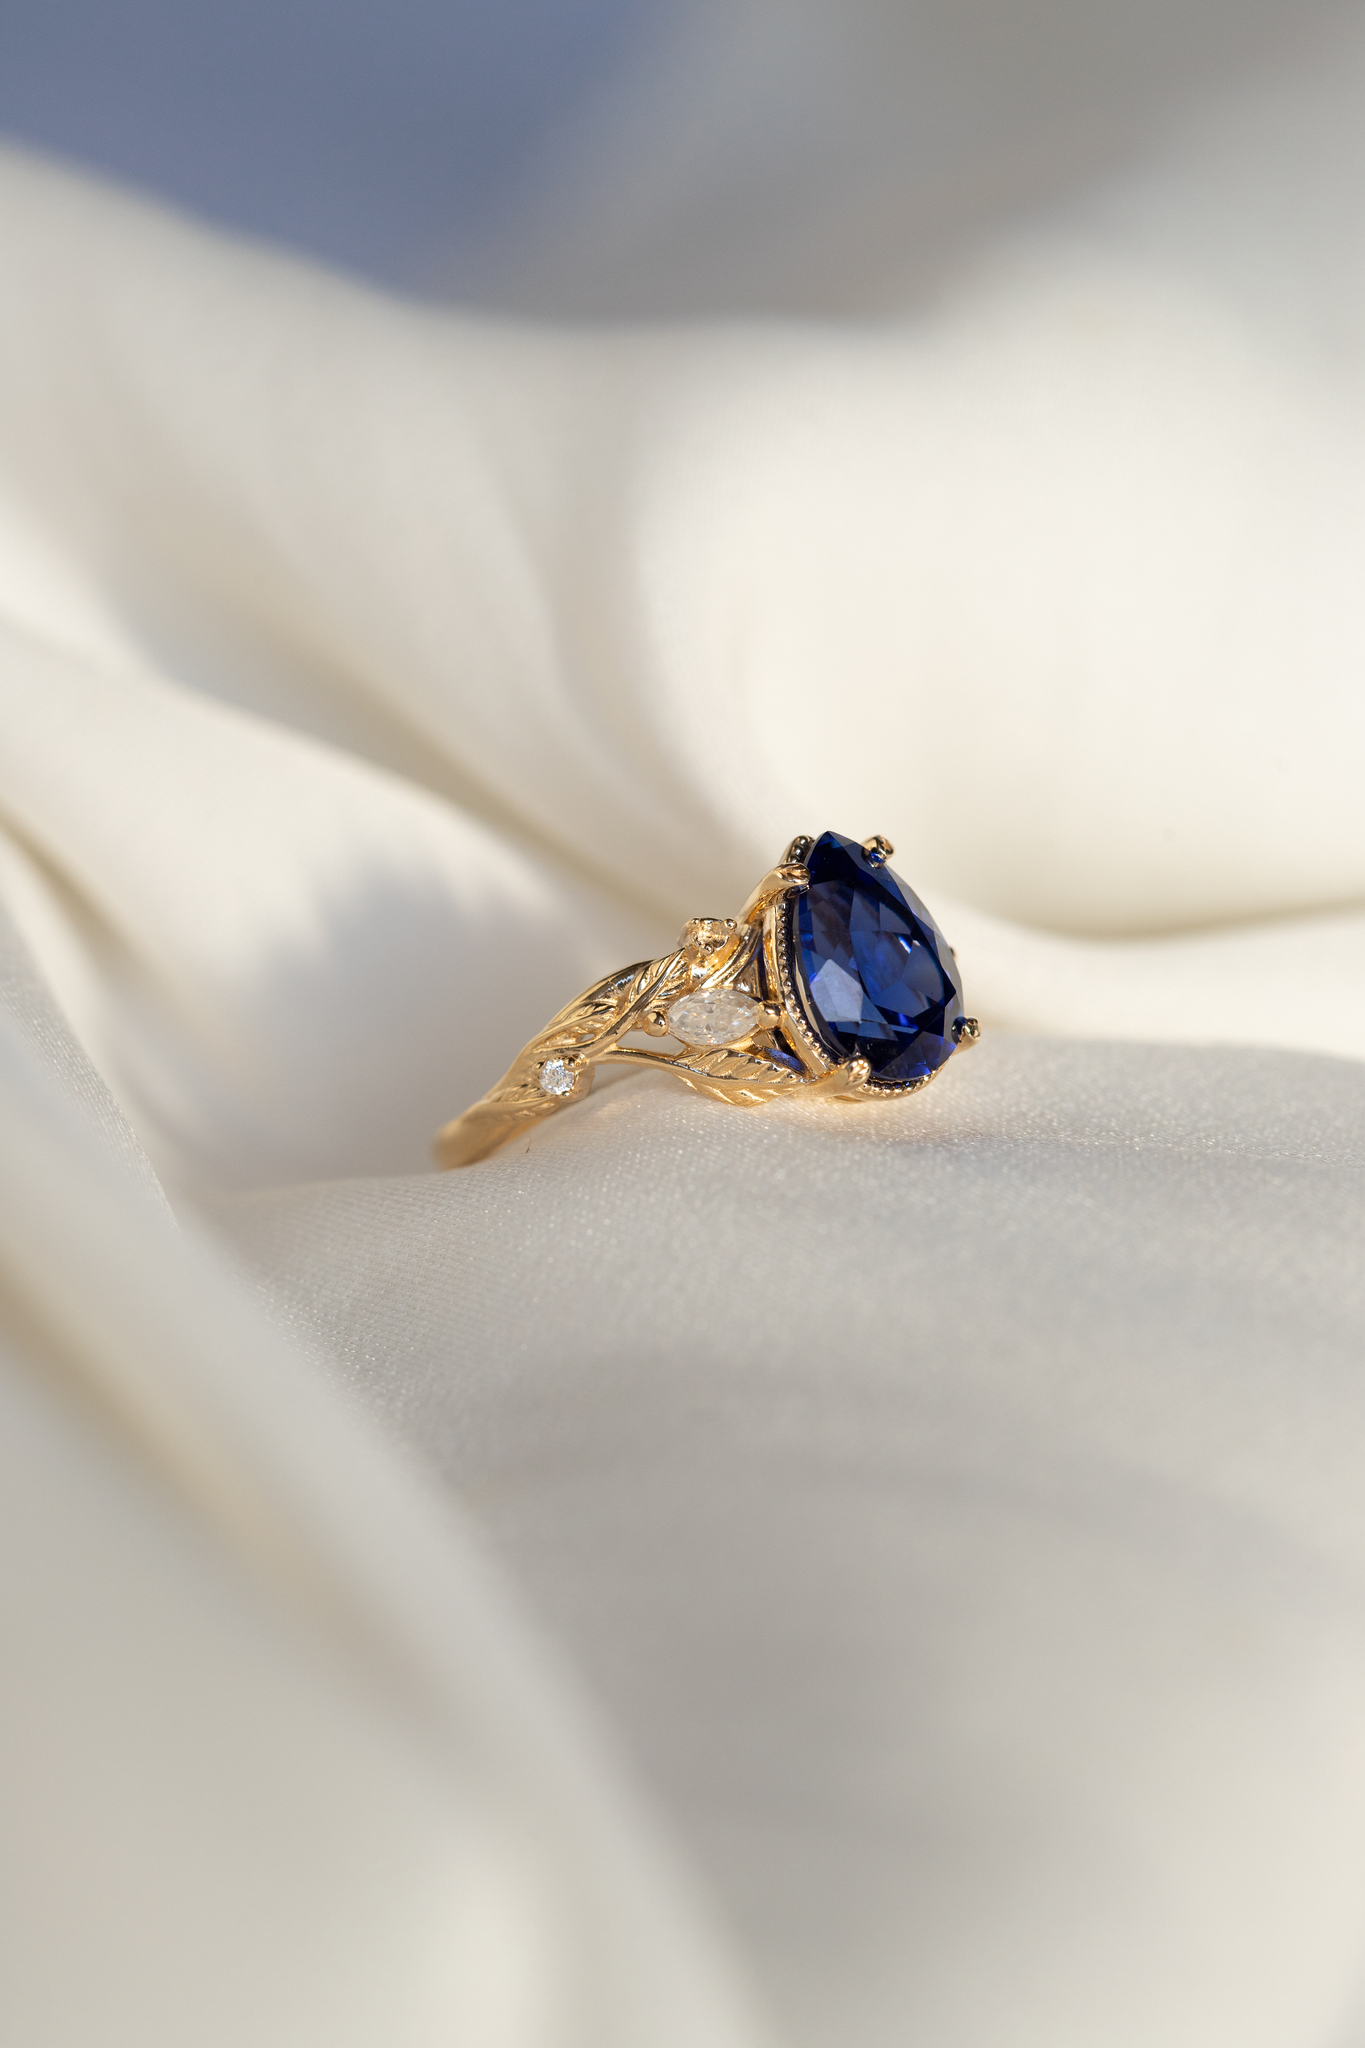 READY TO SHIP: Patricia set in 14K yellow gold, lab created pear cut blue sapphire 10x7 mm, moissanites, RING SIZE 7 US - Eden Garden Jewelry™